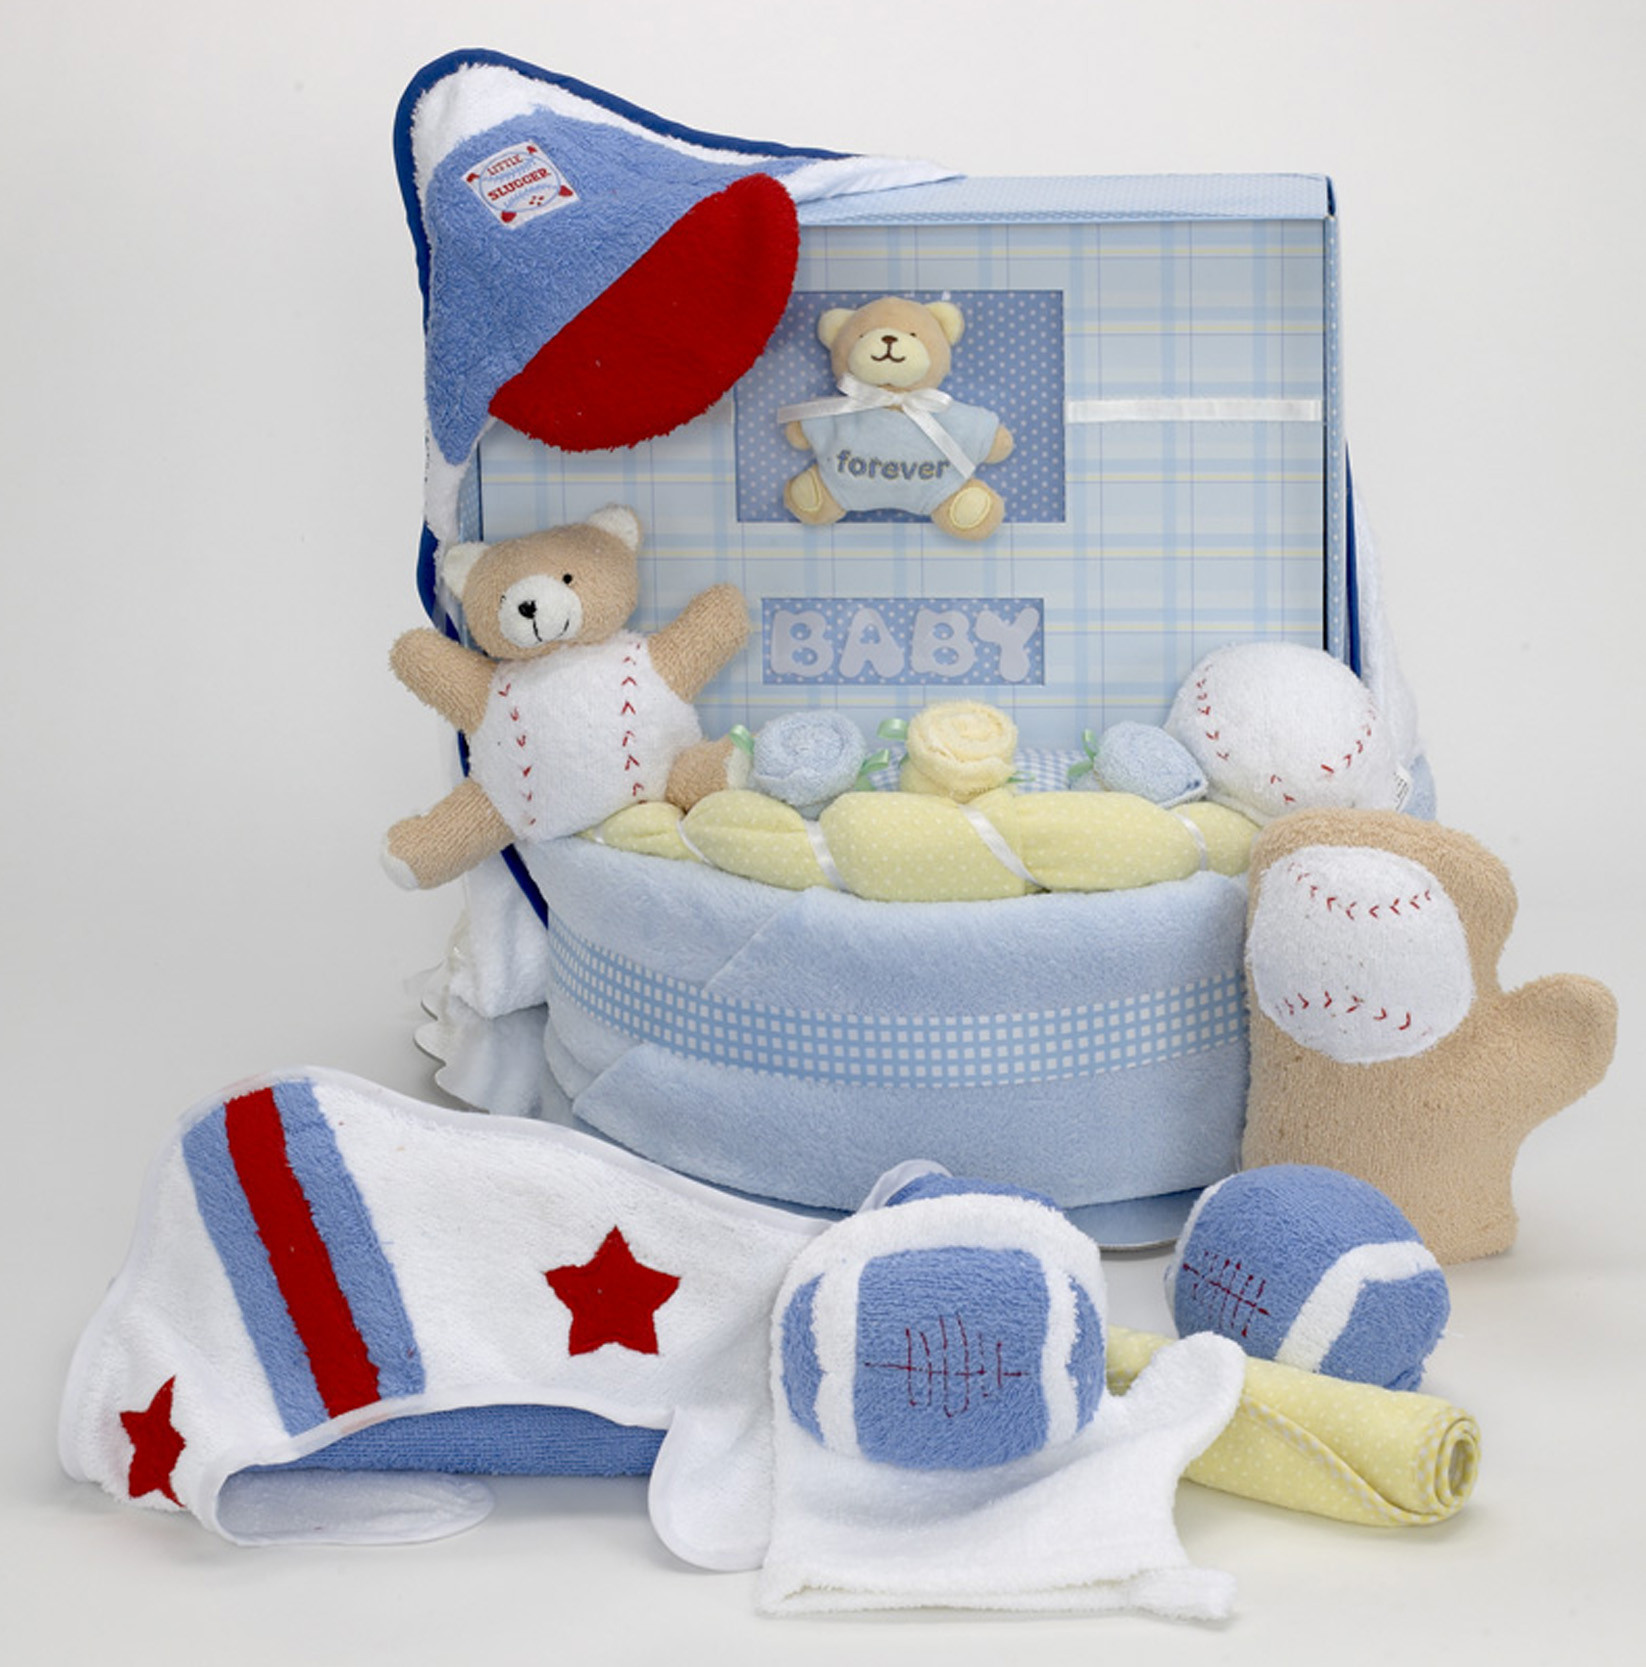 Good Baby Boy Gifts
 5 Best Baby Boy Gifts News from Silly Phillie